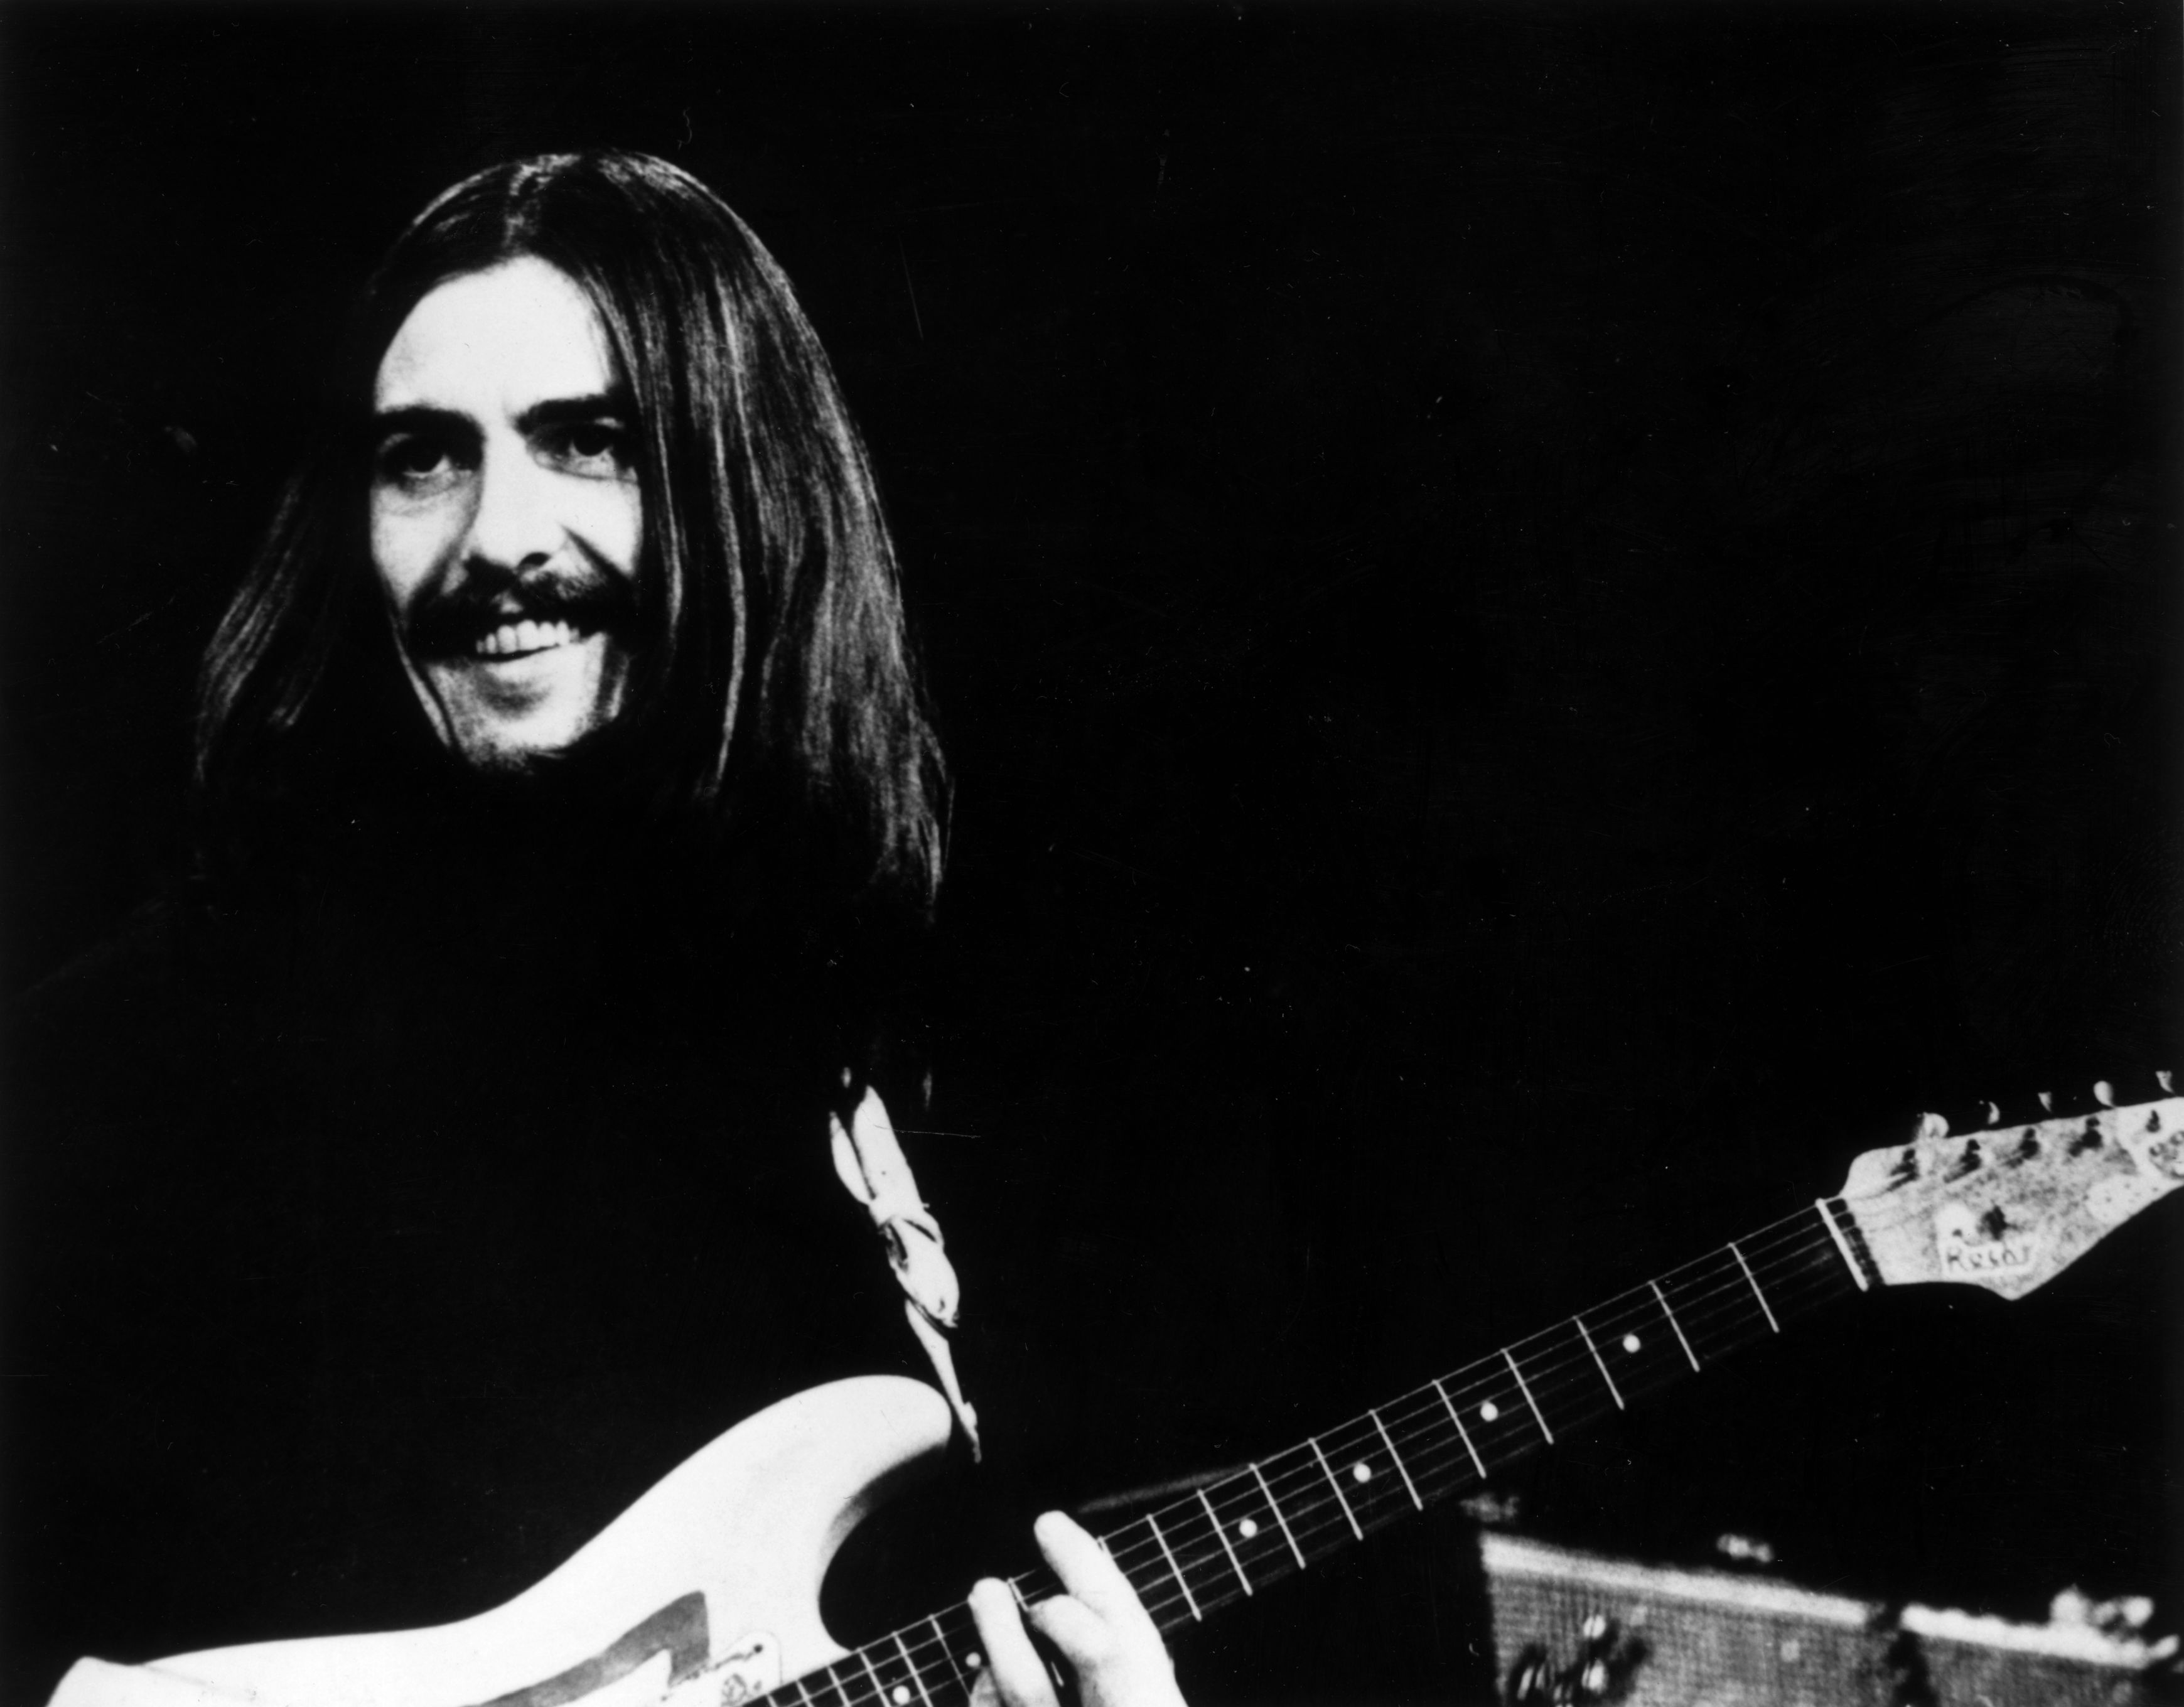 George Harrison Gave 1 Song From The Beatles’ ‘White Album’ a ‘Sexy’ Title